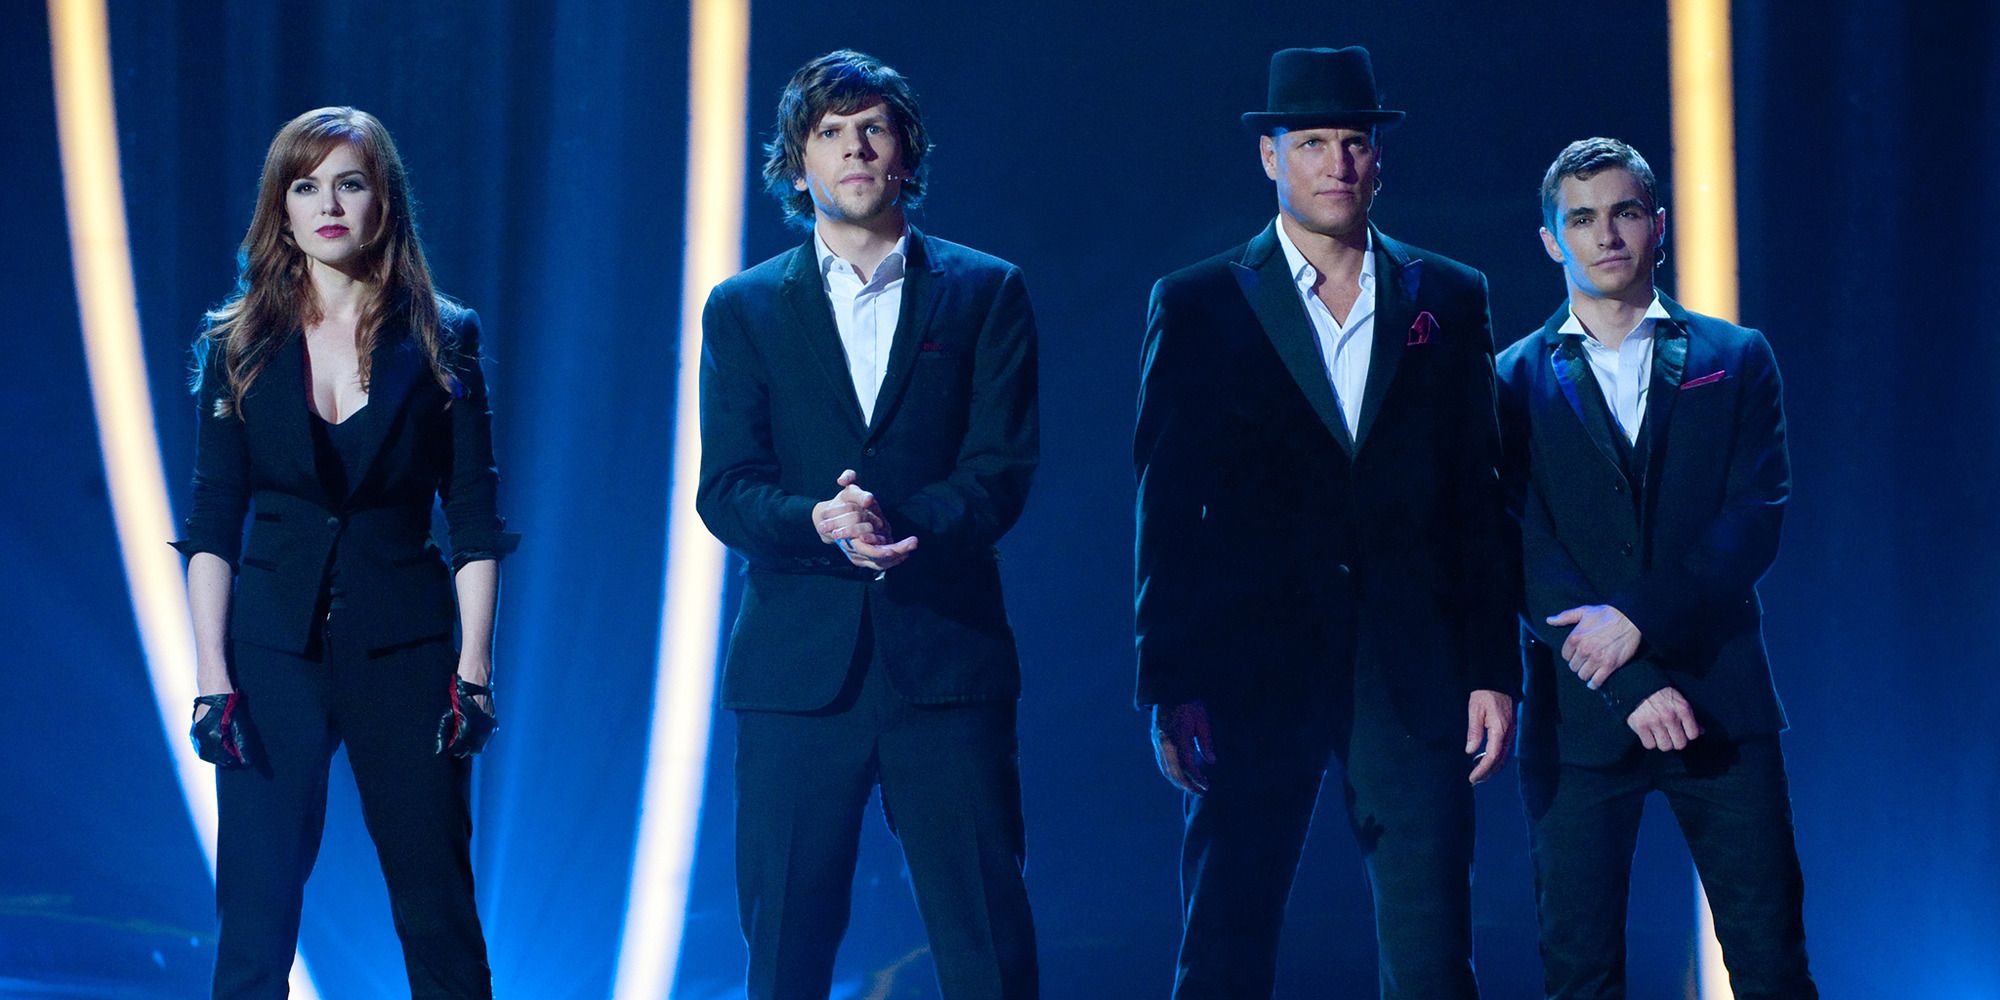 Isla Fisher, Jesse Eisenberg, Woody Harrelson and Dave Franco as magicians on stage in Now You See Me